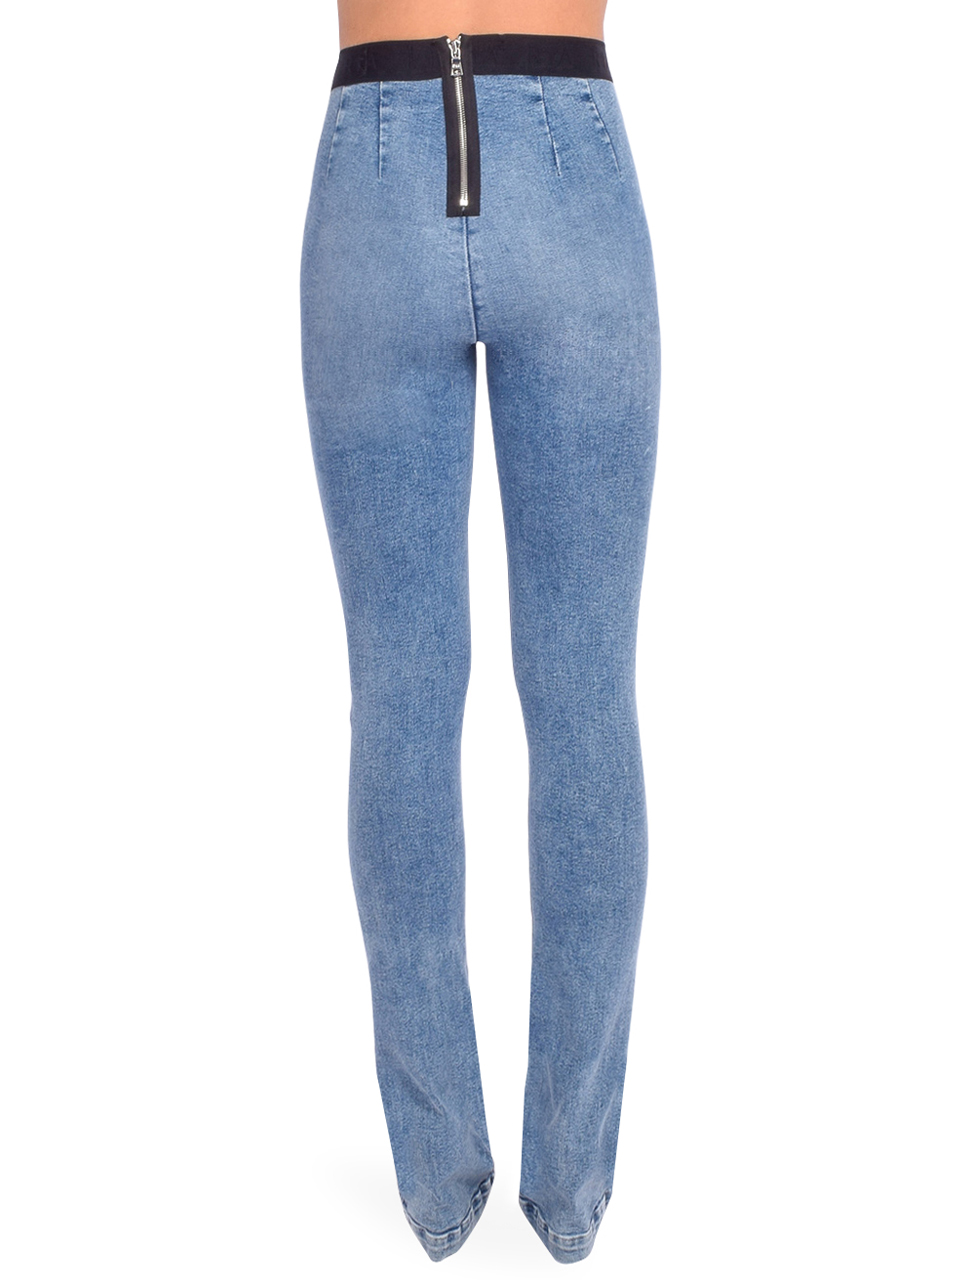 RtA Lais Pant in Pacific Coast Blue Back View 